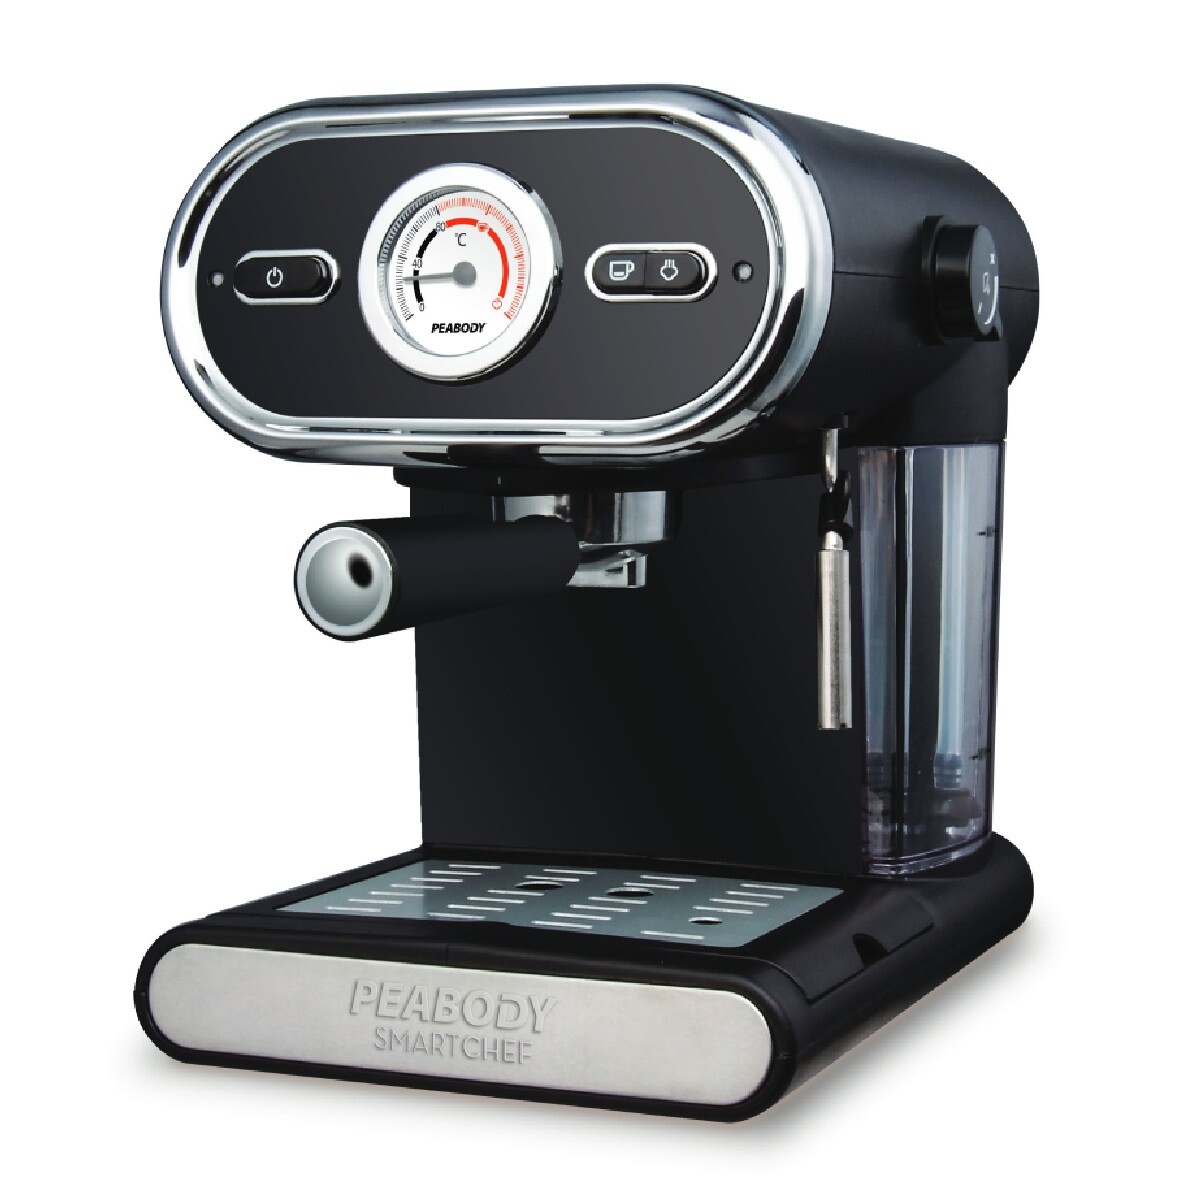 Cafetera Express Peabody Ce5002 